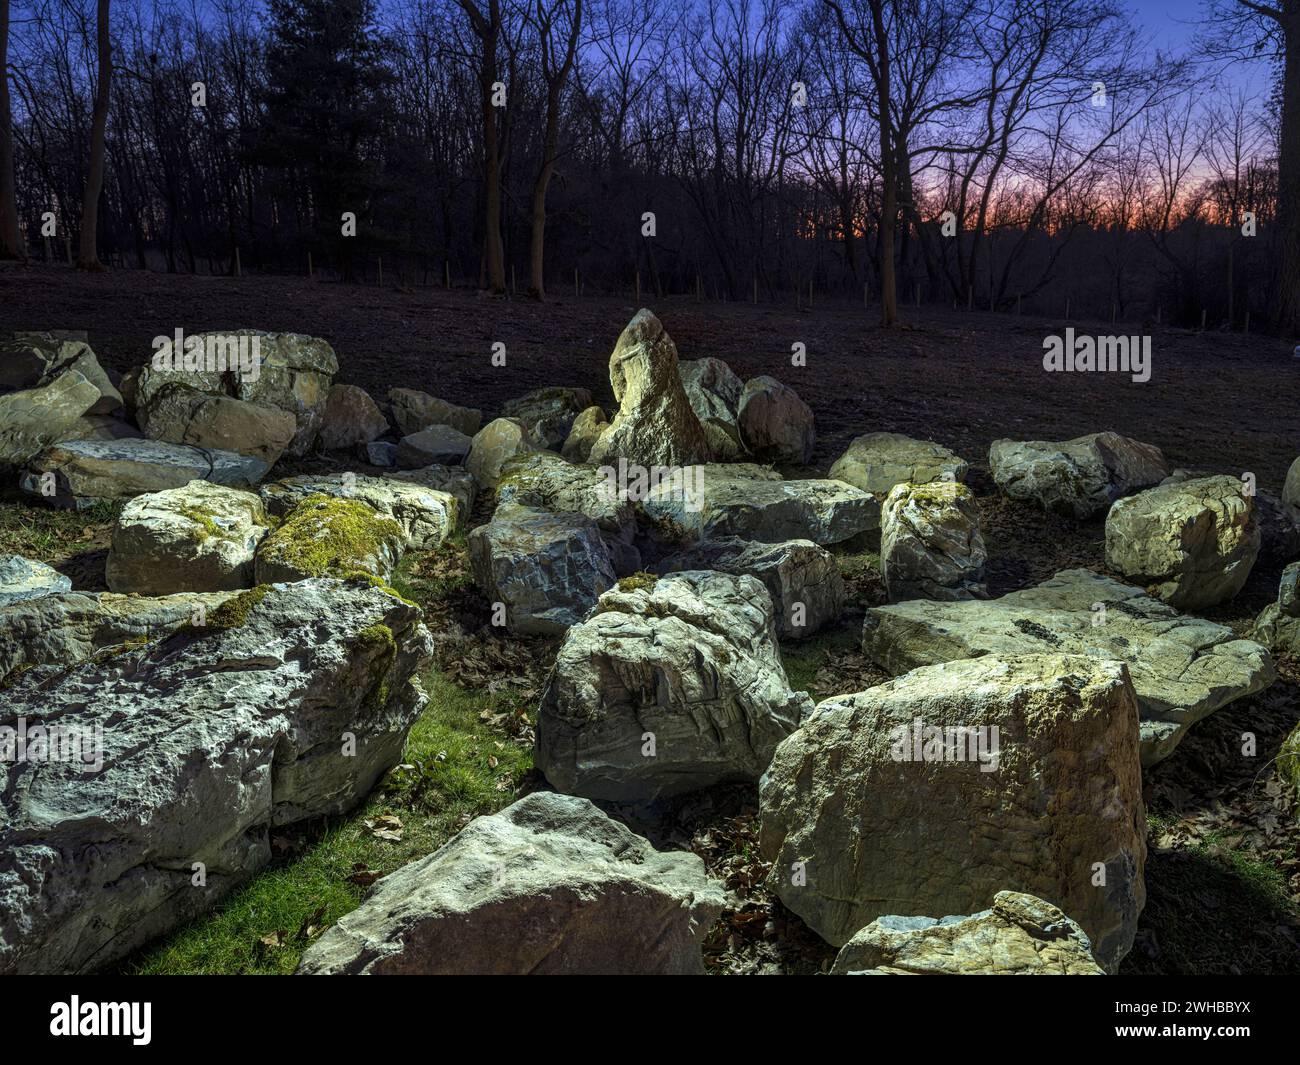 Field of large rocks and boulders with dramatic light at night, Pennsylvania USA Stock Photo